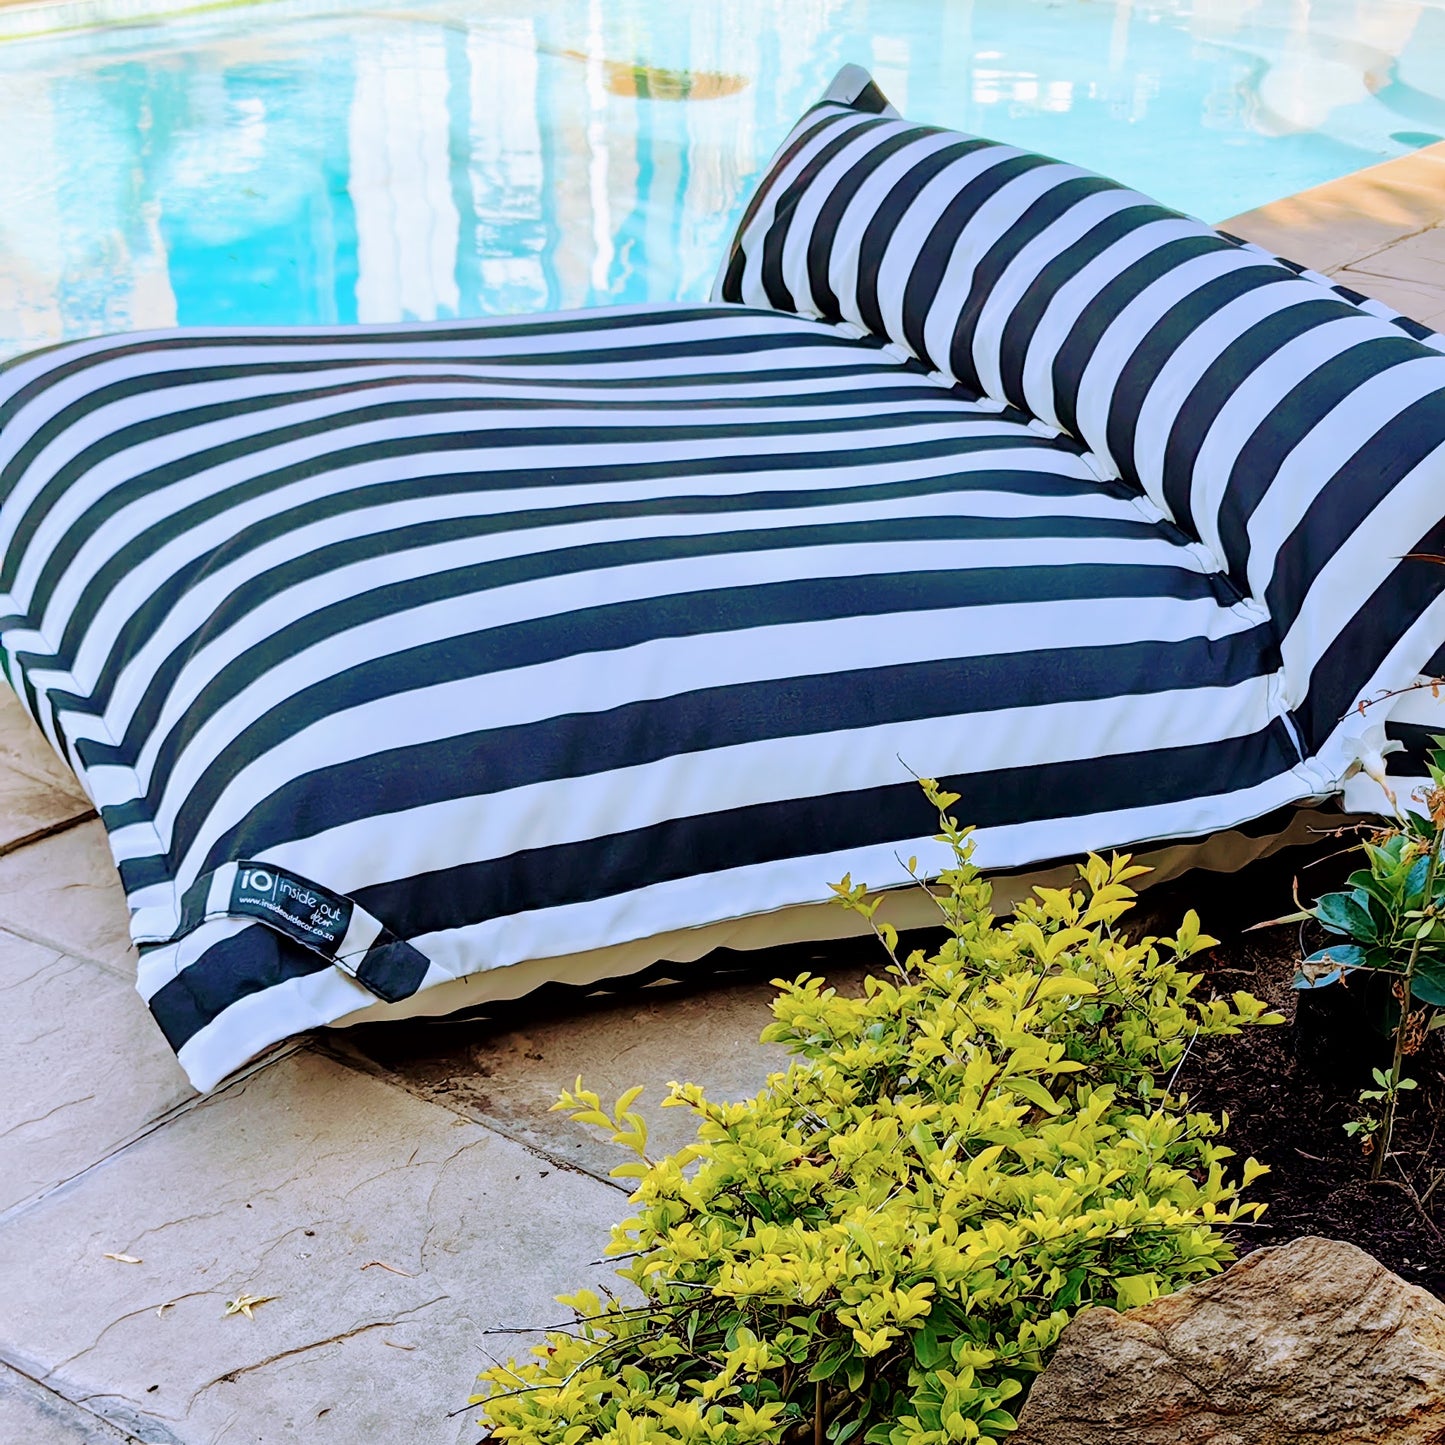 Aqua Loungers "Deluxe" - with Cushion